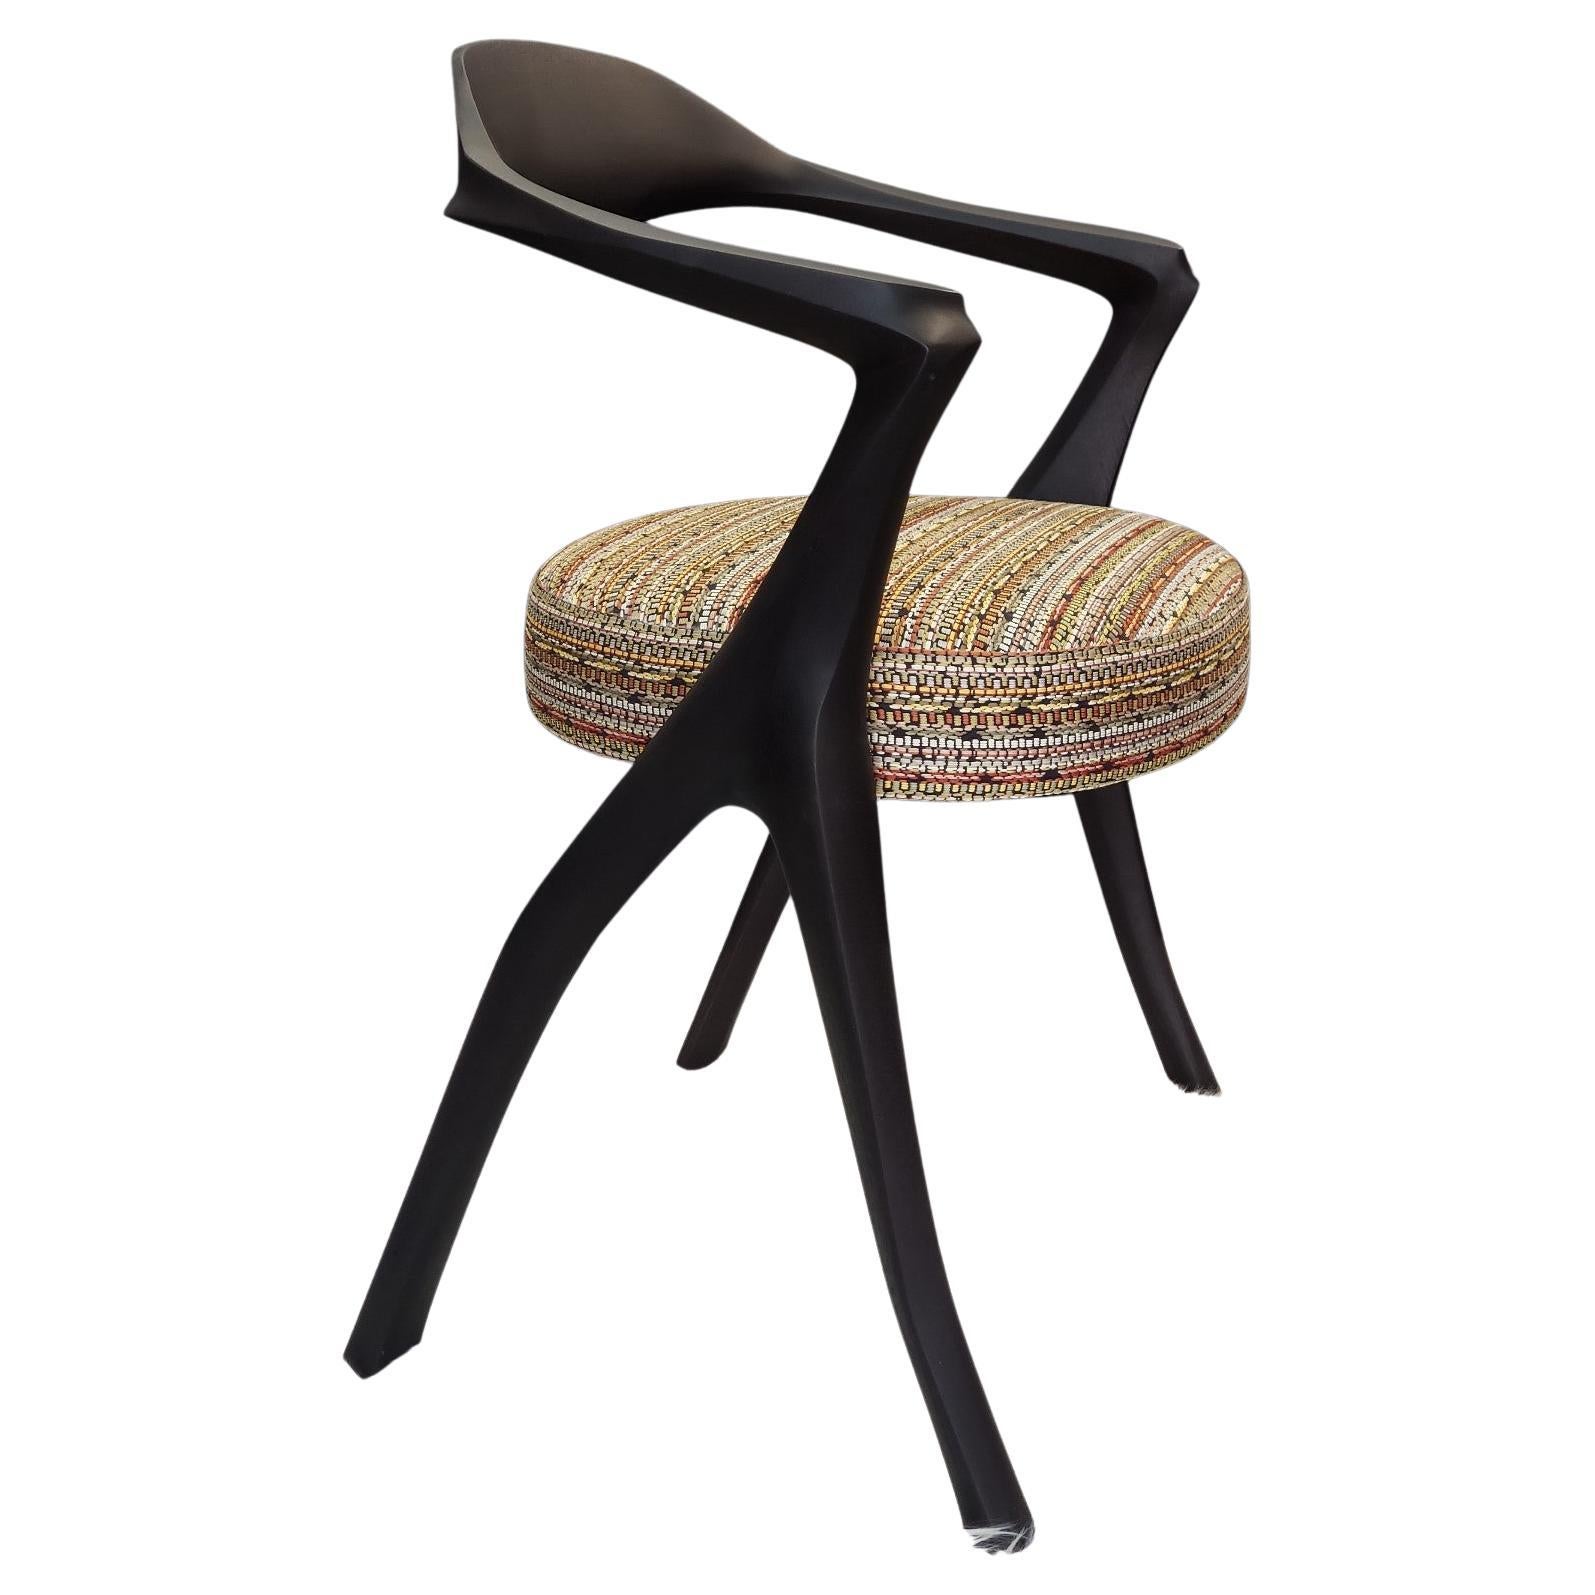 HOMAGE Chair-Organic, Sculptural, HandCarved, Ebonized ContemporaryDining Armchair For Sale